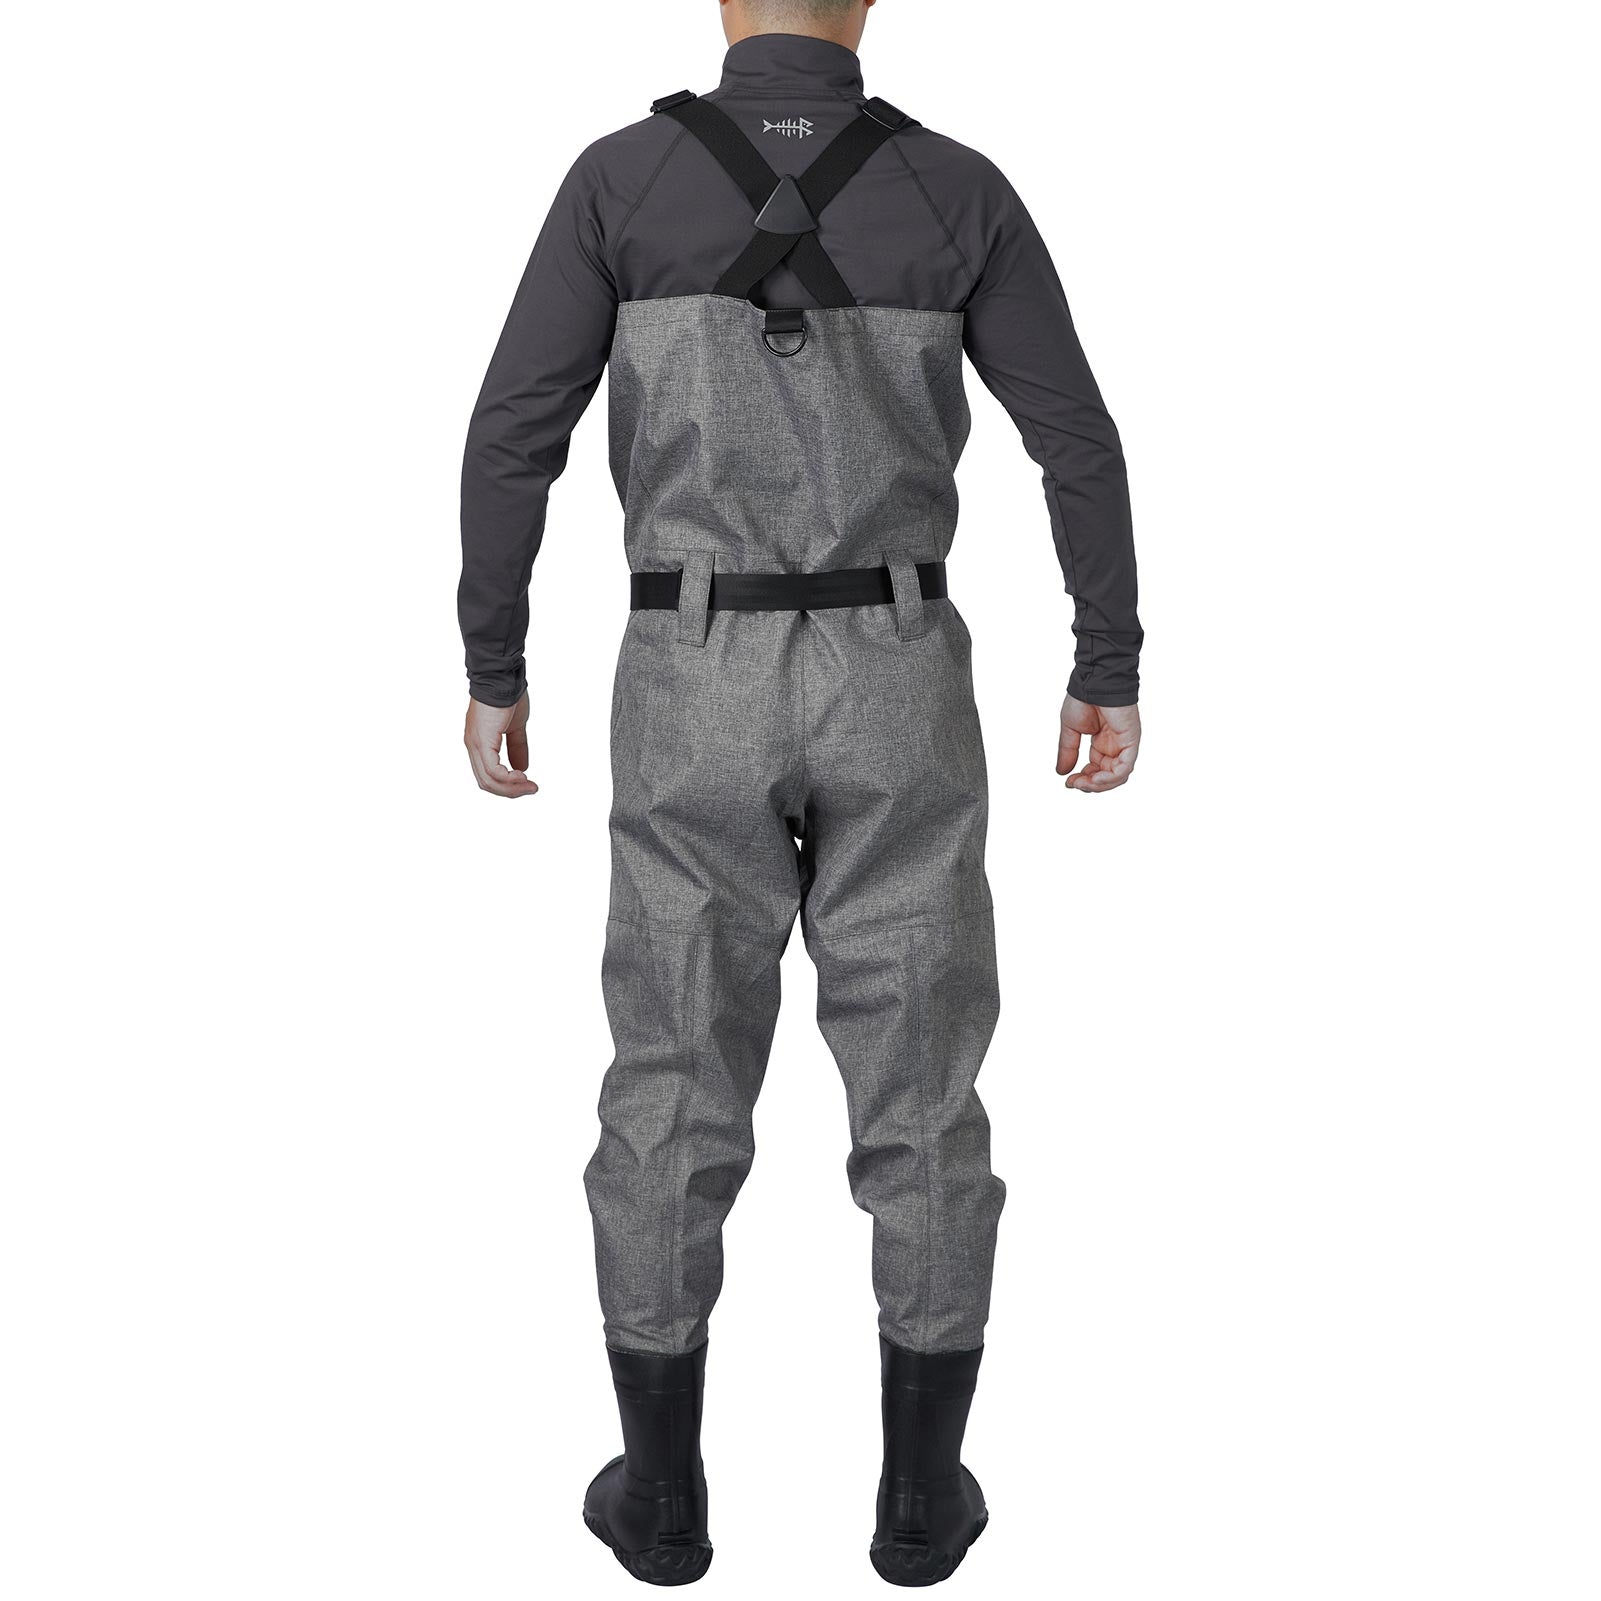 Bassdash Men’s Breathable Chest and Waist Convertible Waders for Fishing Hunting, Stocking Foot and Boot Foot Waders, Large King